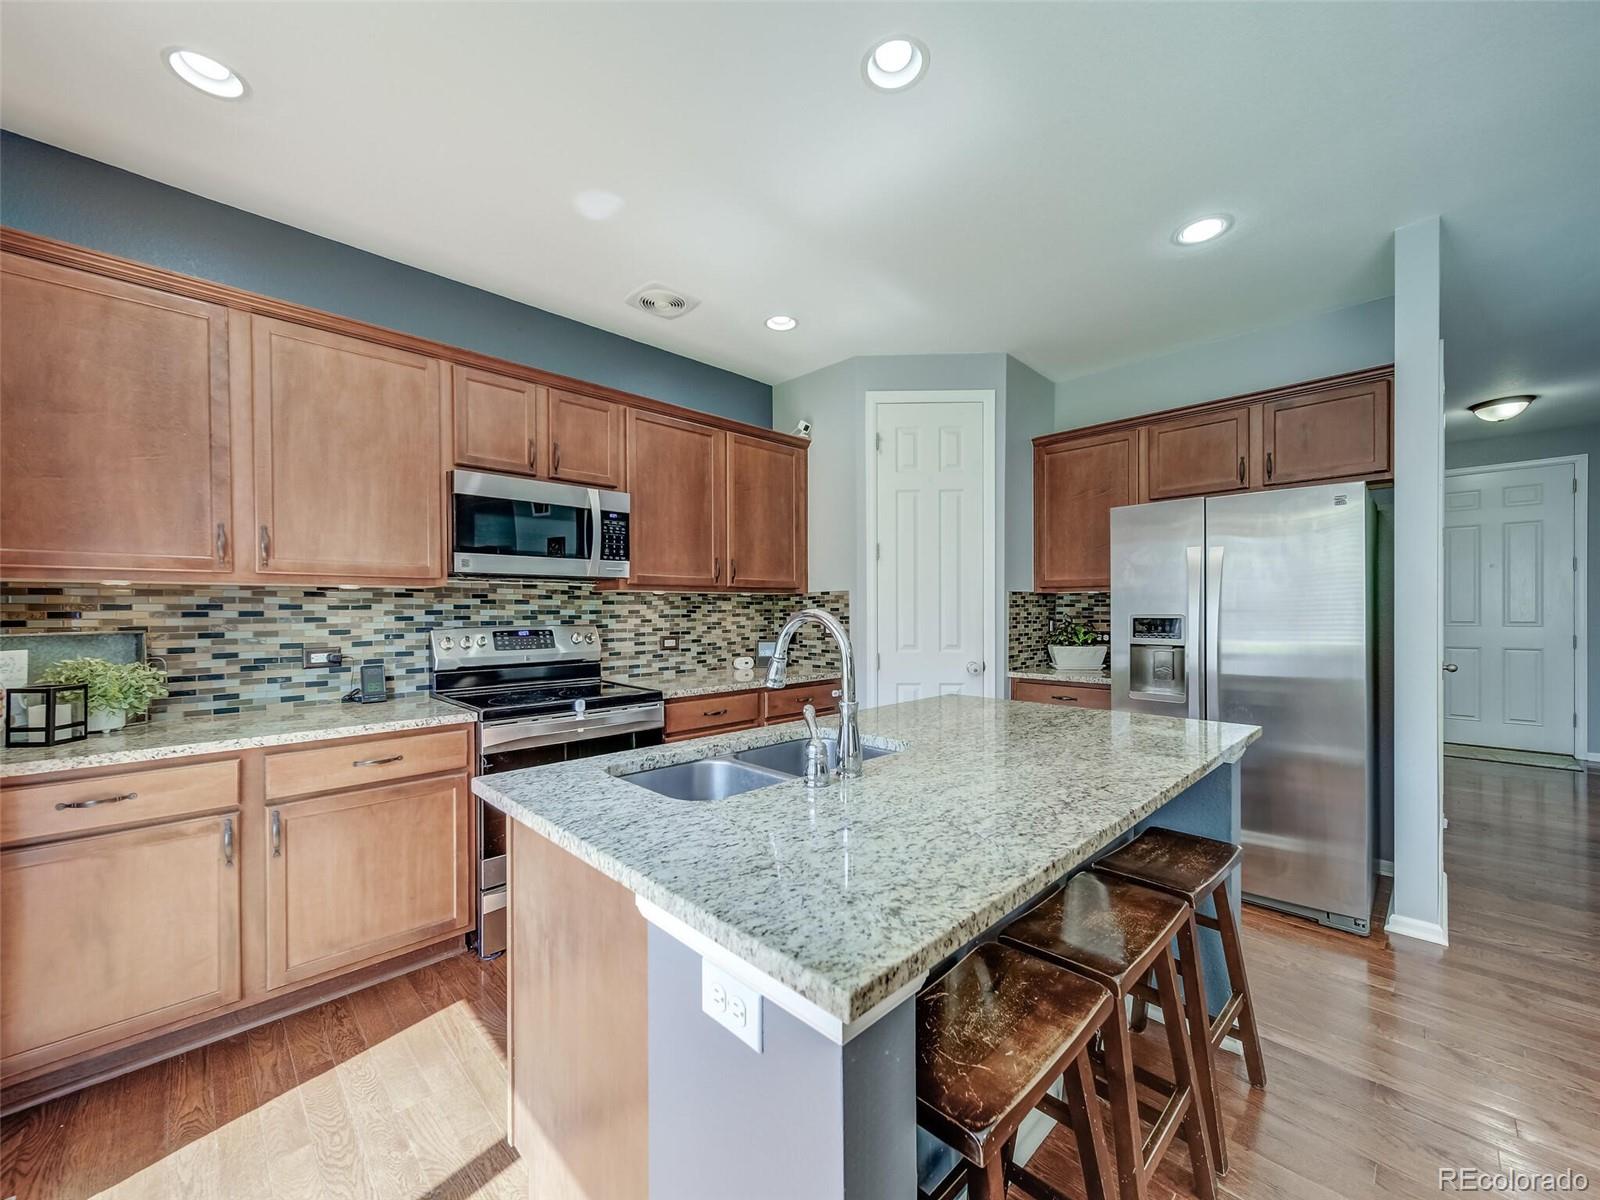 a kitchen with stainless steel appliances granite countertop a kitchen island hardwood floor sink stove and microwave